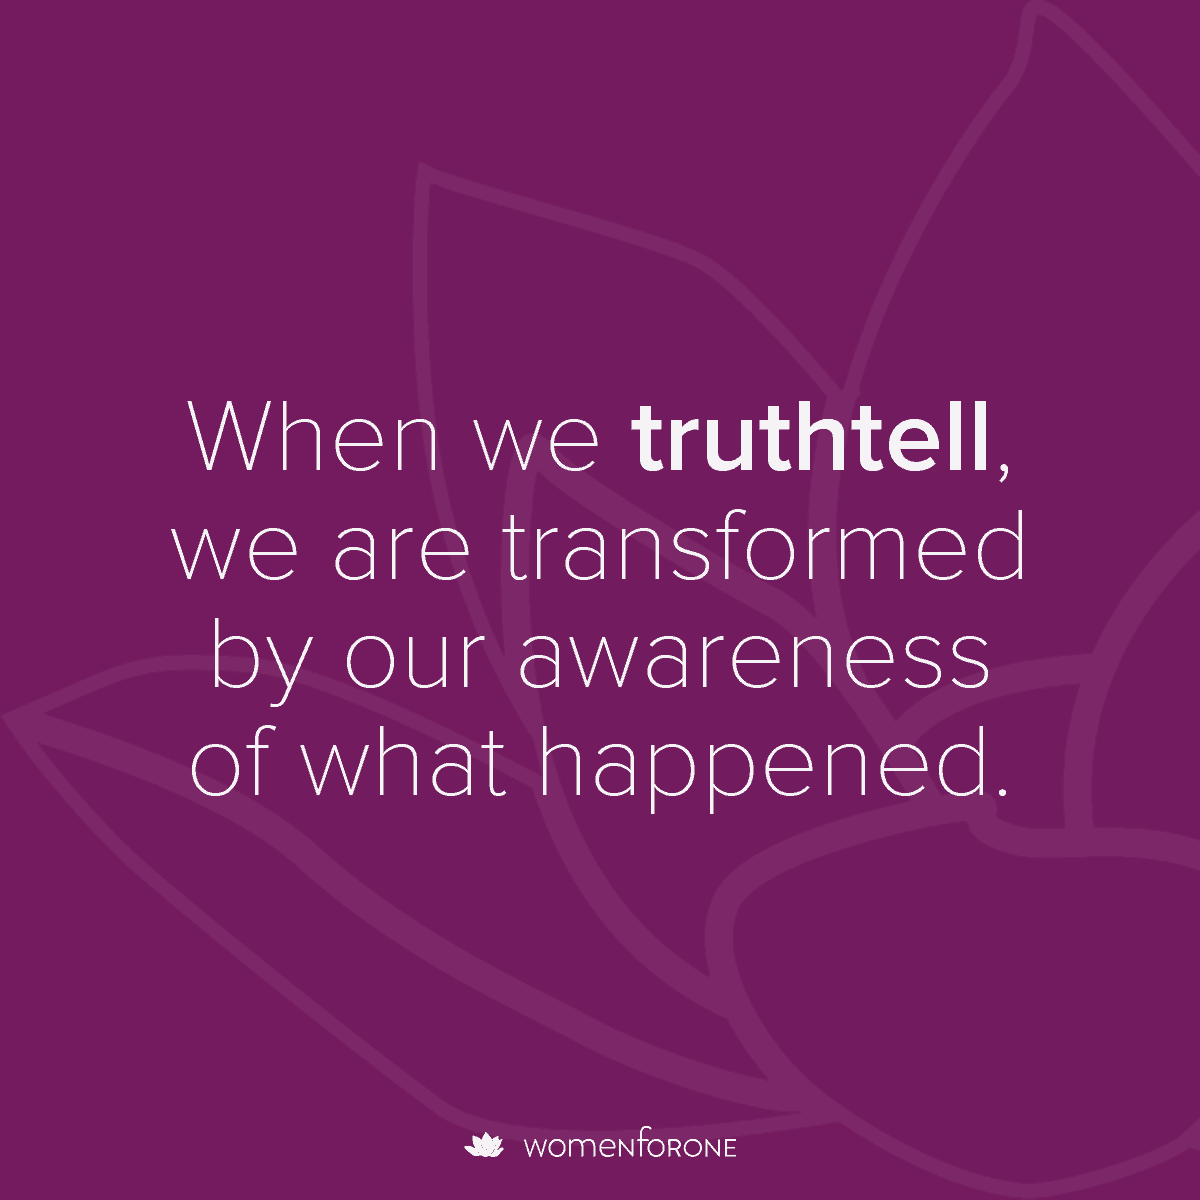 When we truthtell, we are transformed by our awareness of what happened.